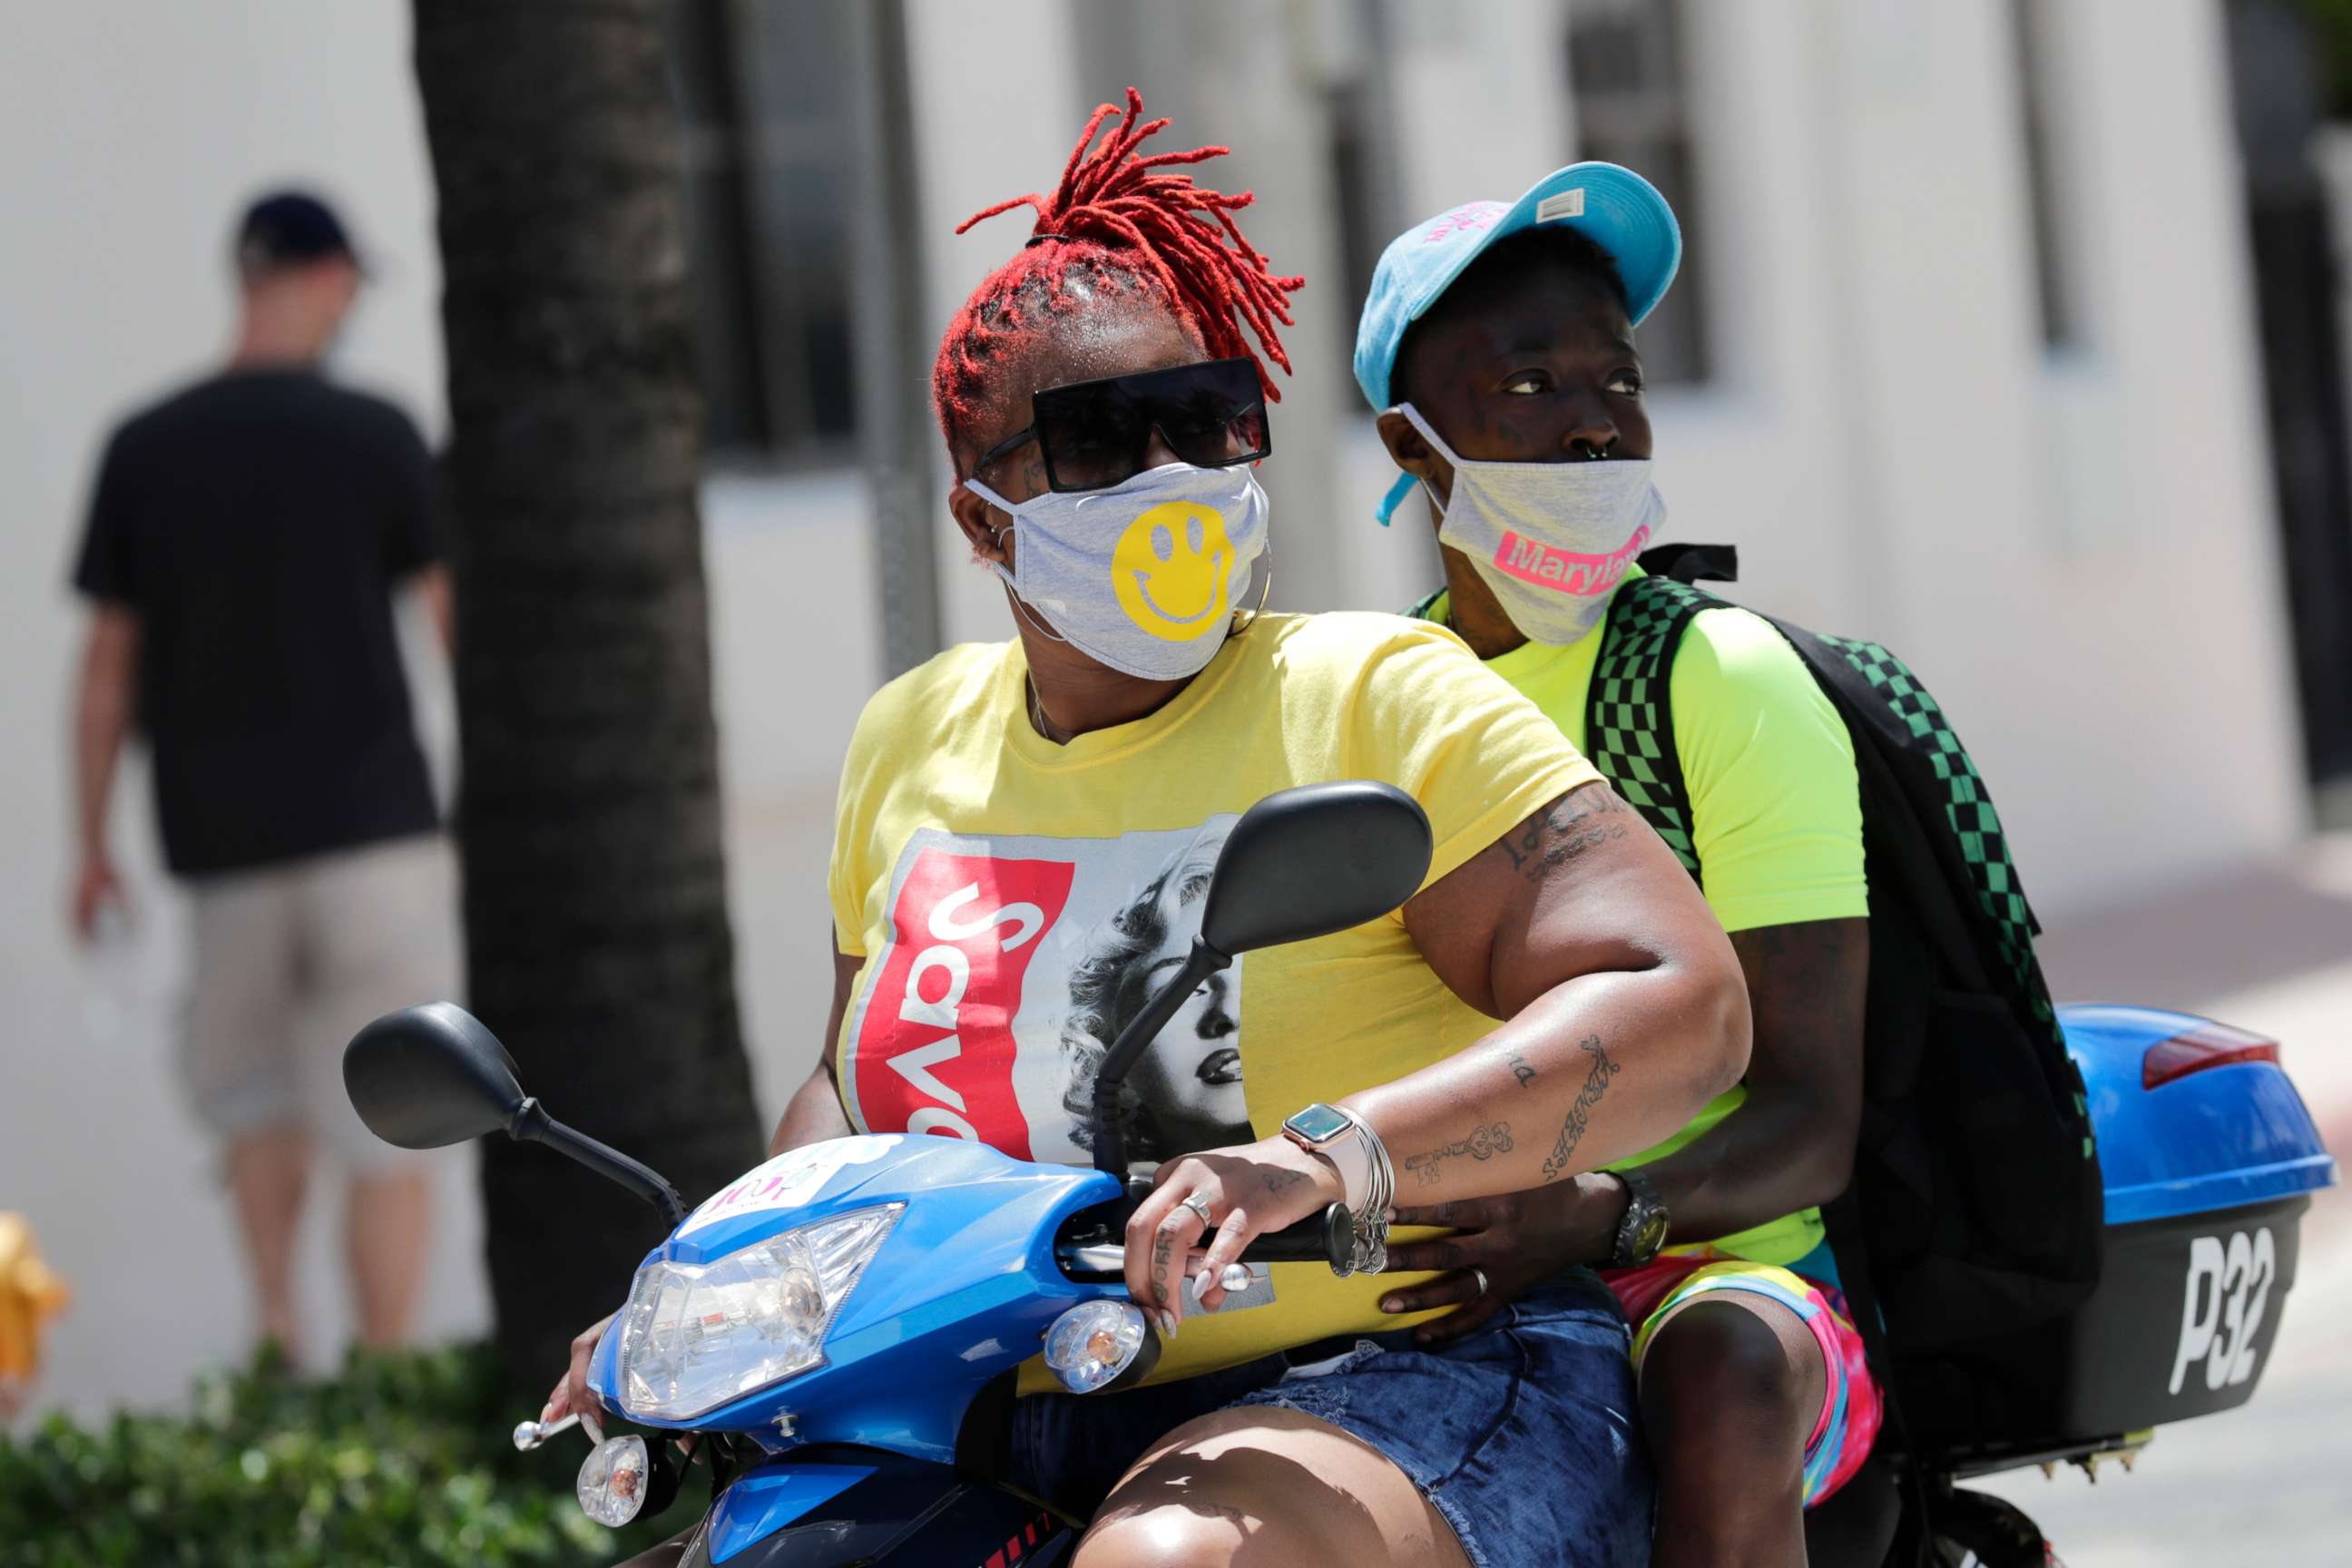 PHOTO: People wearing protective face masks ride a scooter down Ocean Drive during the coronavirus pandemic, July 12, 2020, in Miami Beach, Fla.